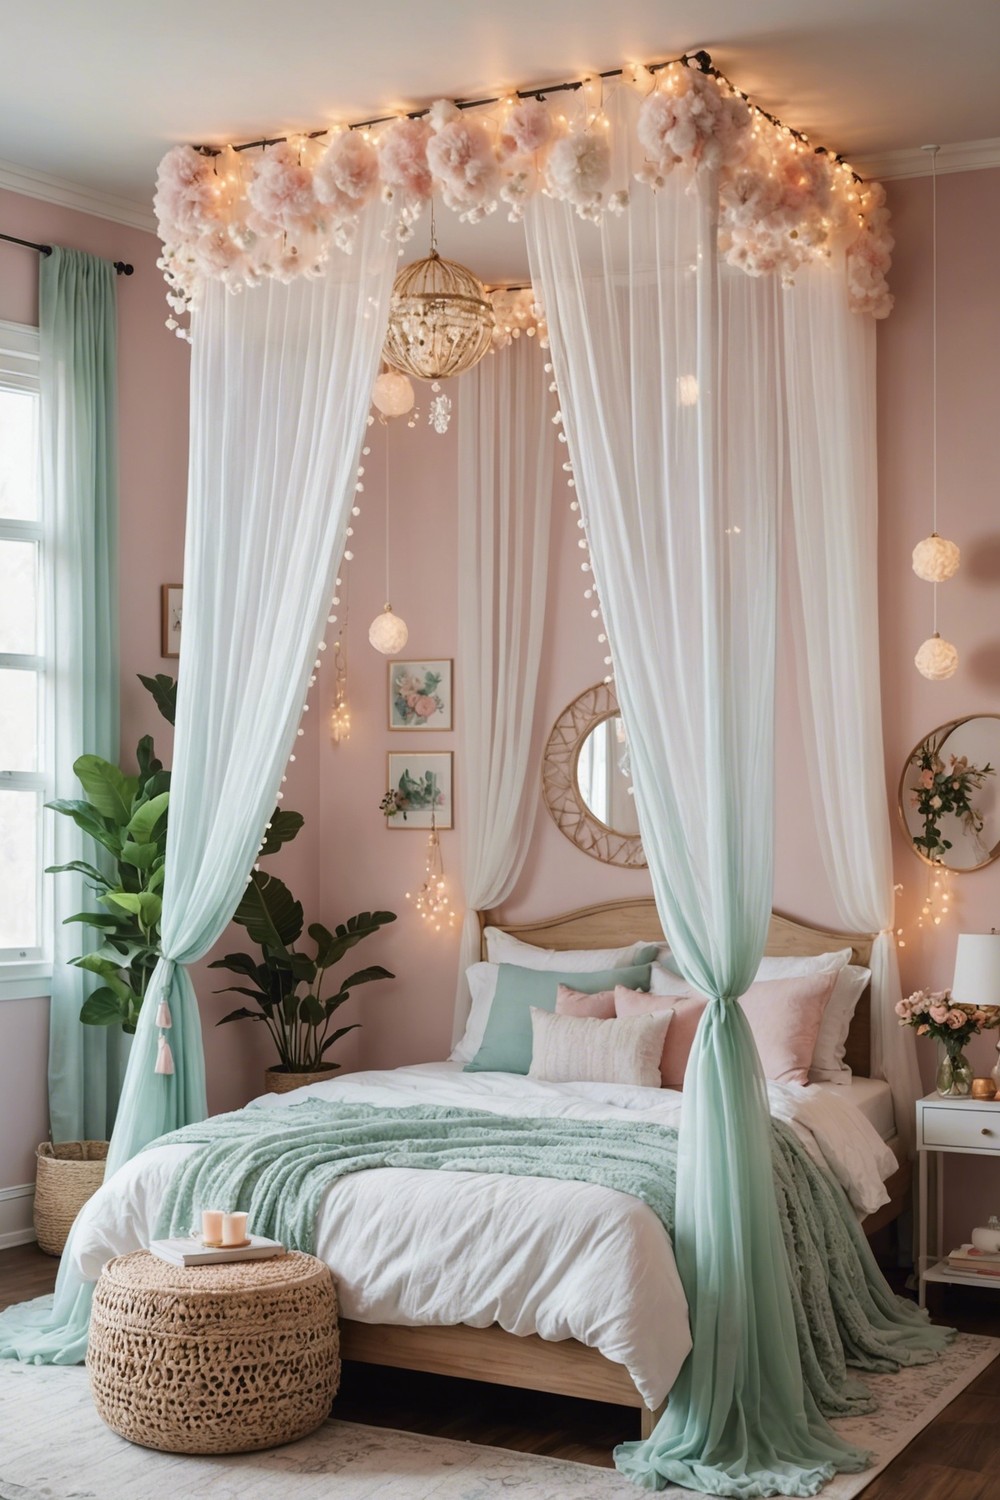 Whimsical Escape: Hanging Pompoms and Fairy Lights in Pastel Hues